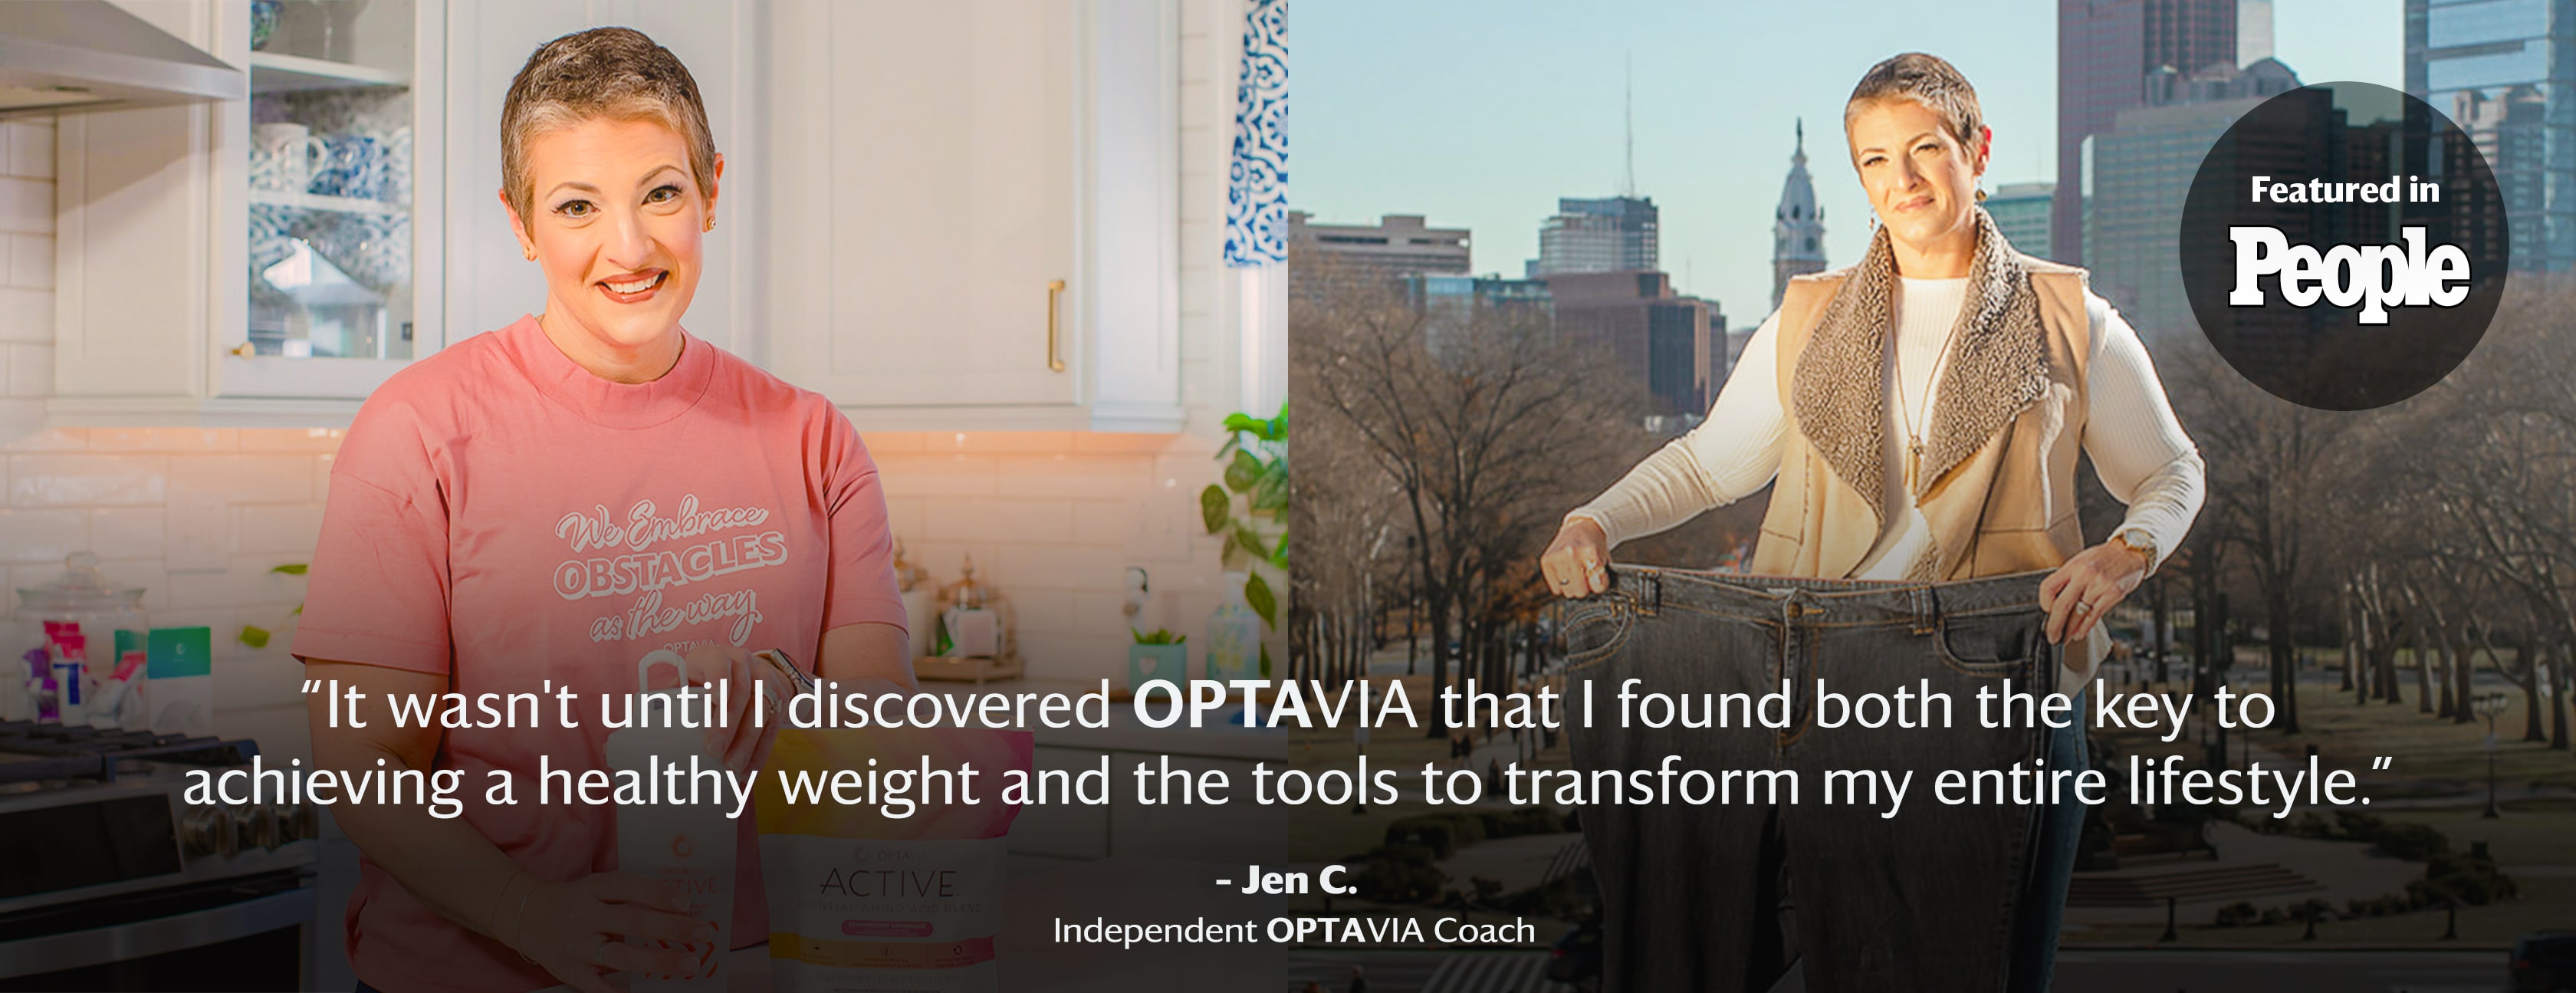 It wasn't until I discovered Optavia that I found both the key to achieving a healthy weight and the tools to transform my entire lifestyle. Jen C., Independent Optavia Coach.